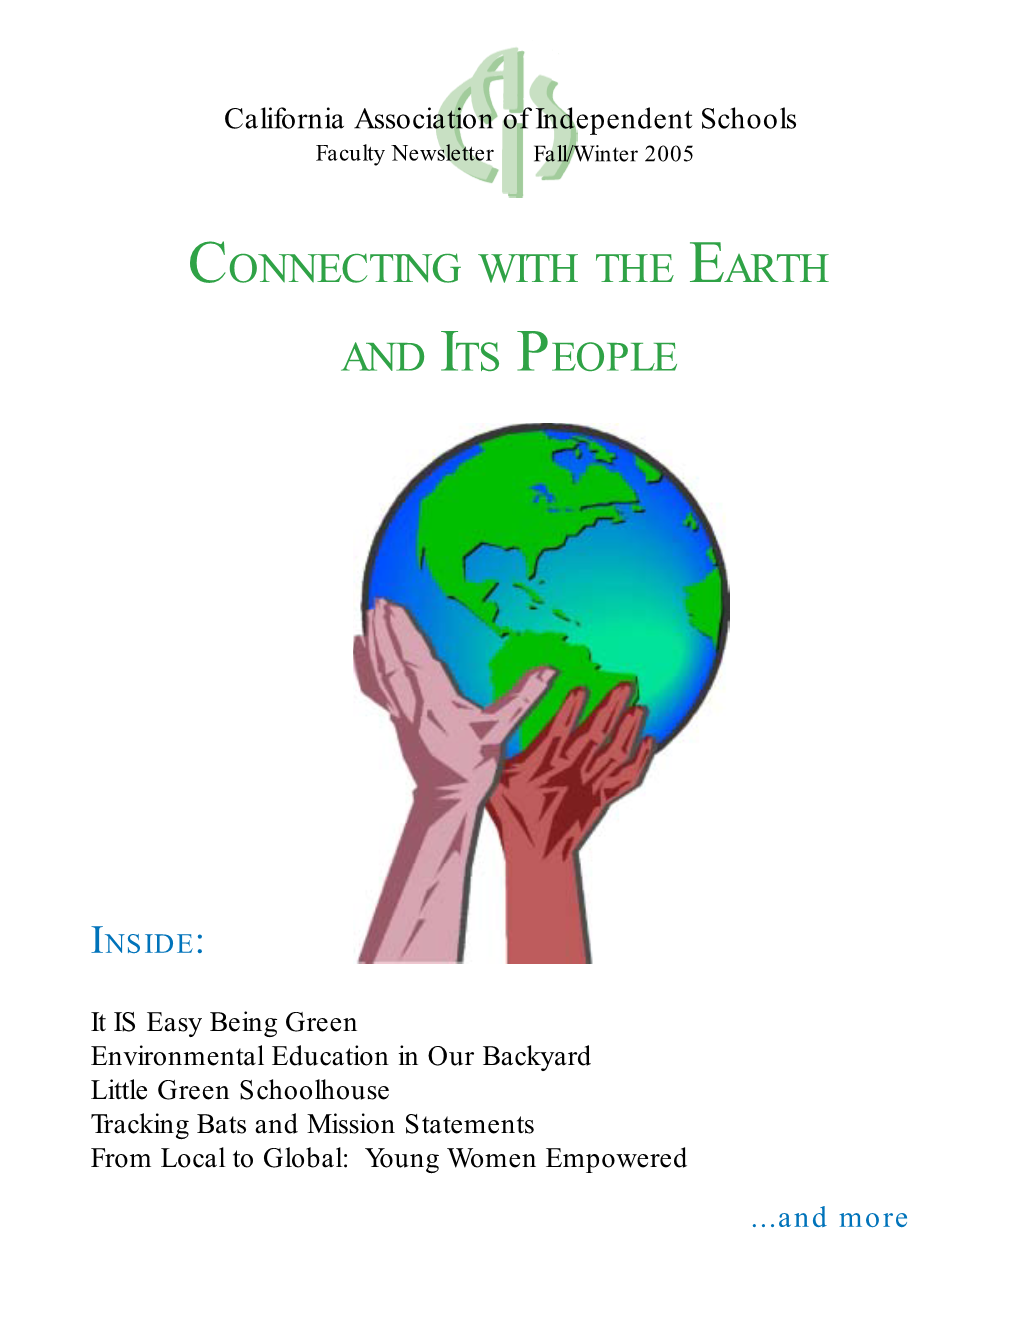 Connecting with the Earth and Its People